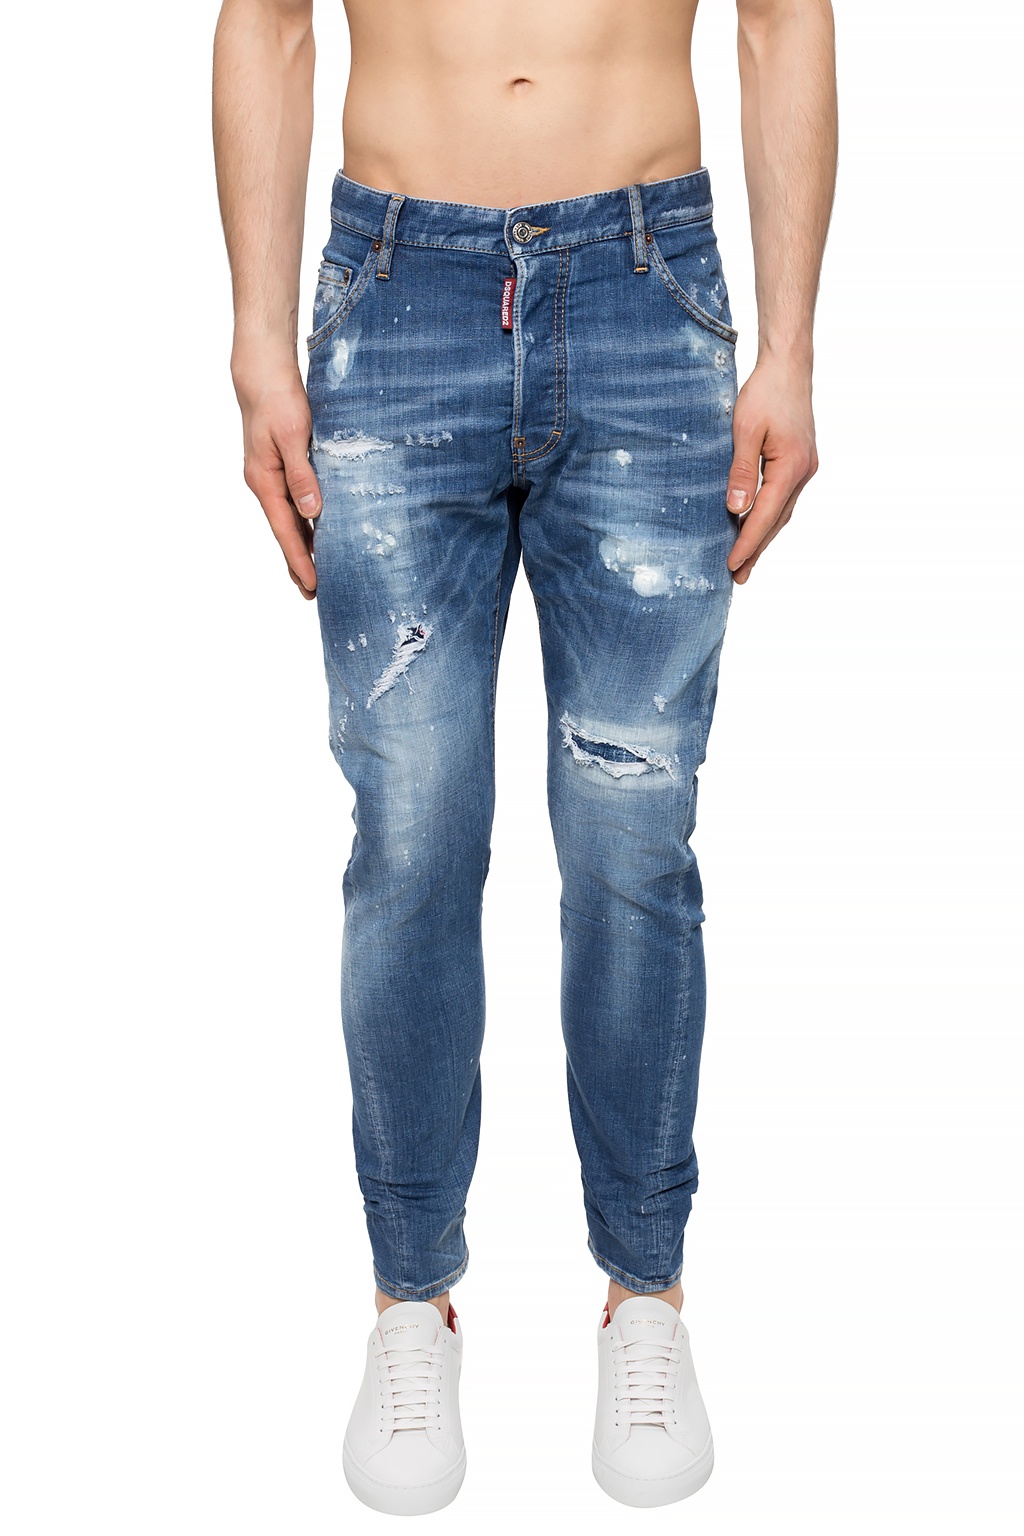 Dsquared2 'Classic Kenny Jean' distressed jeans | Men's Clothing 